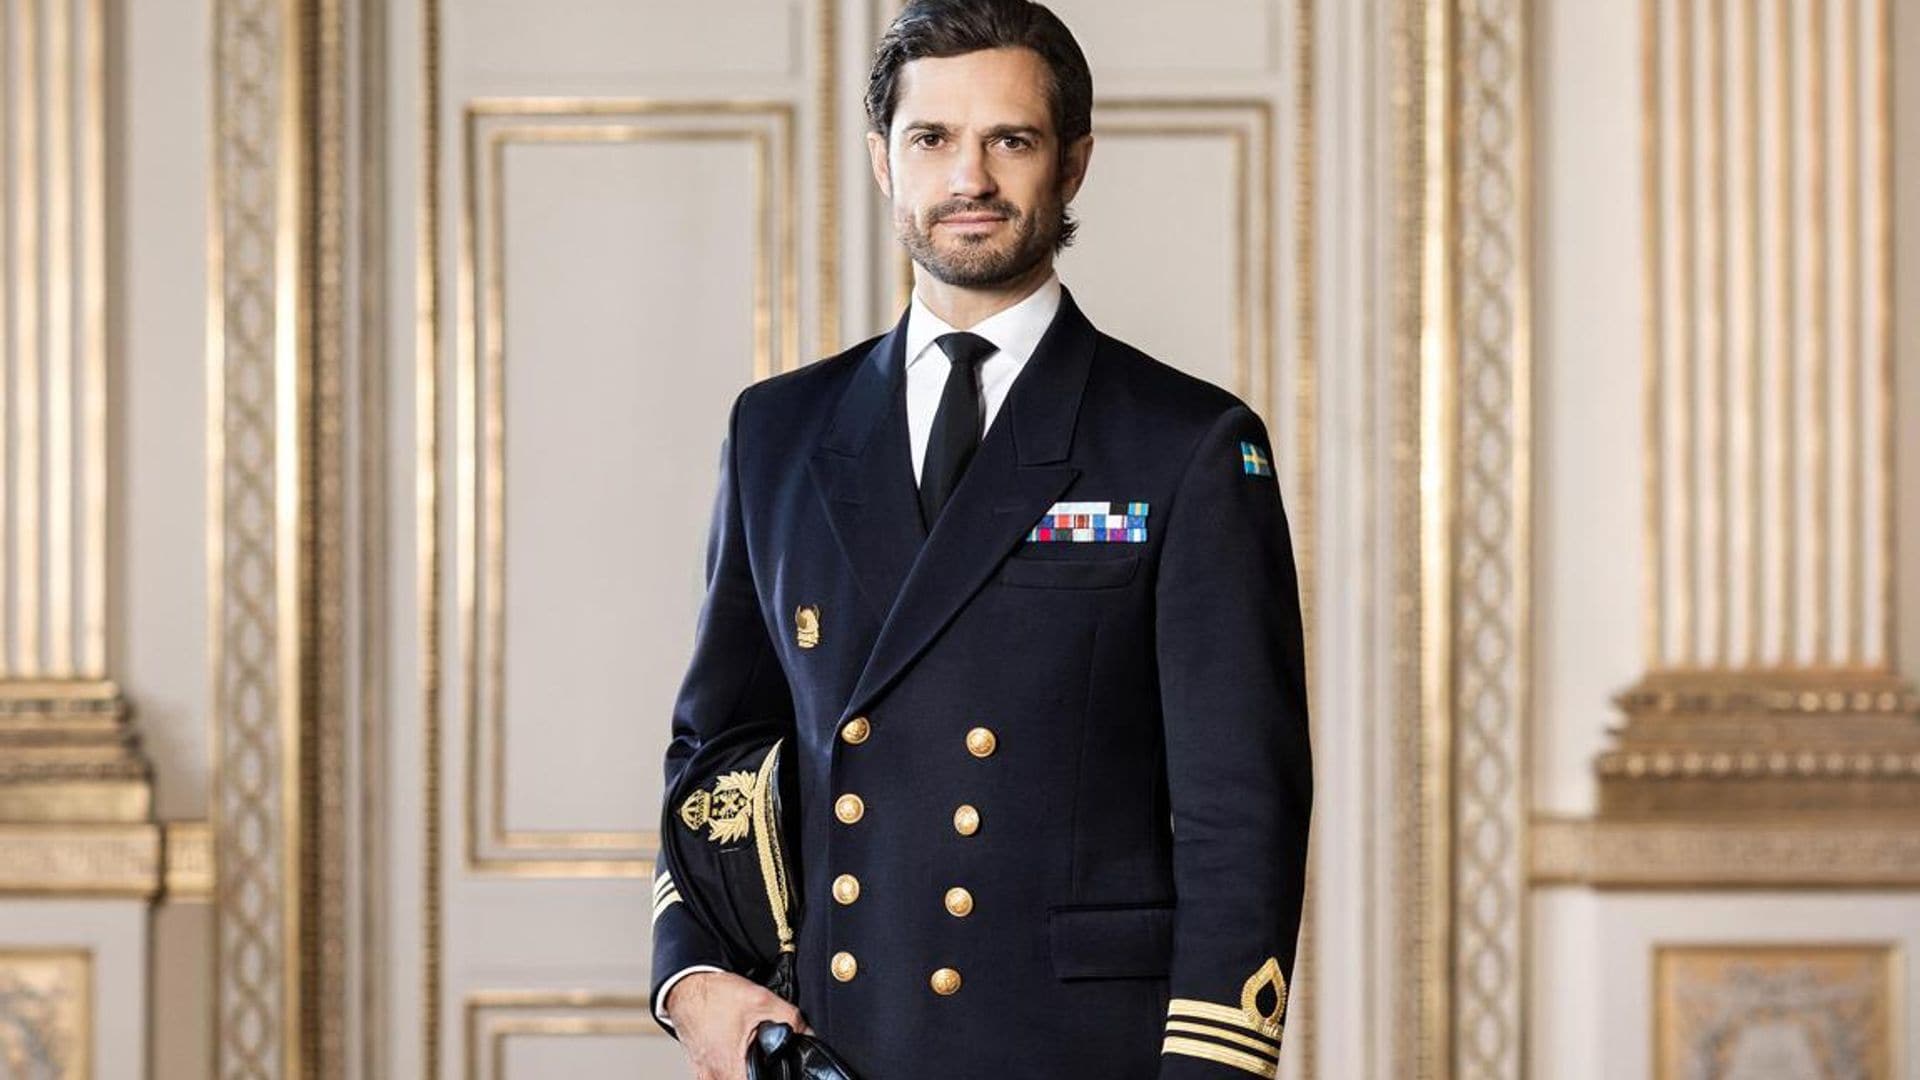 Prince Carl Philip serving in armed forces during coronavirus pandemic